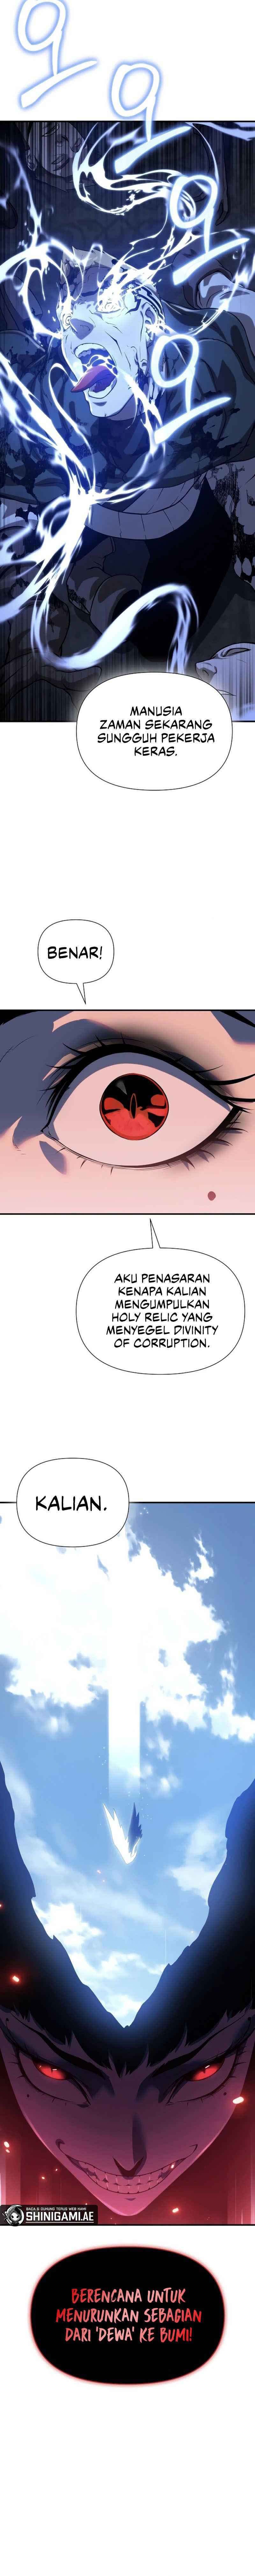 The Priest Of Corruption Chapter 39